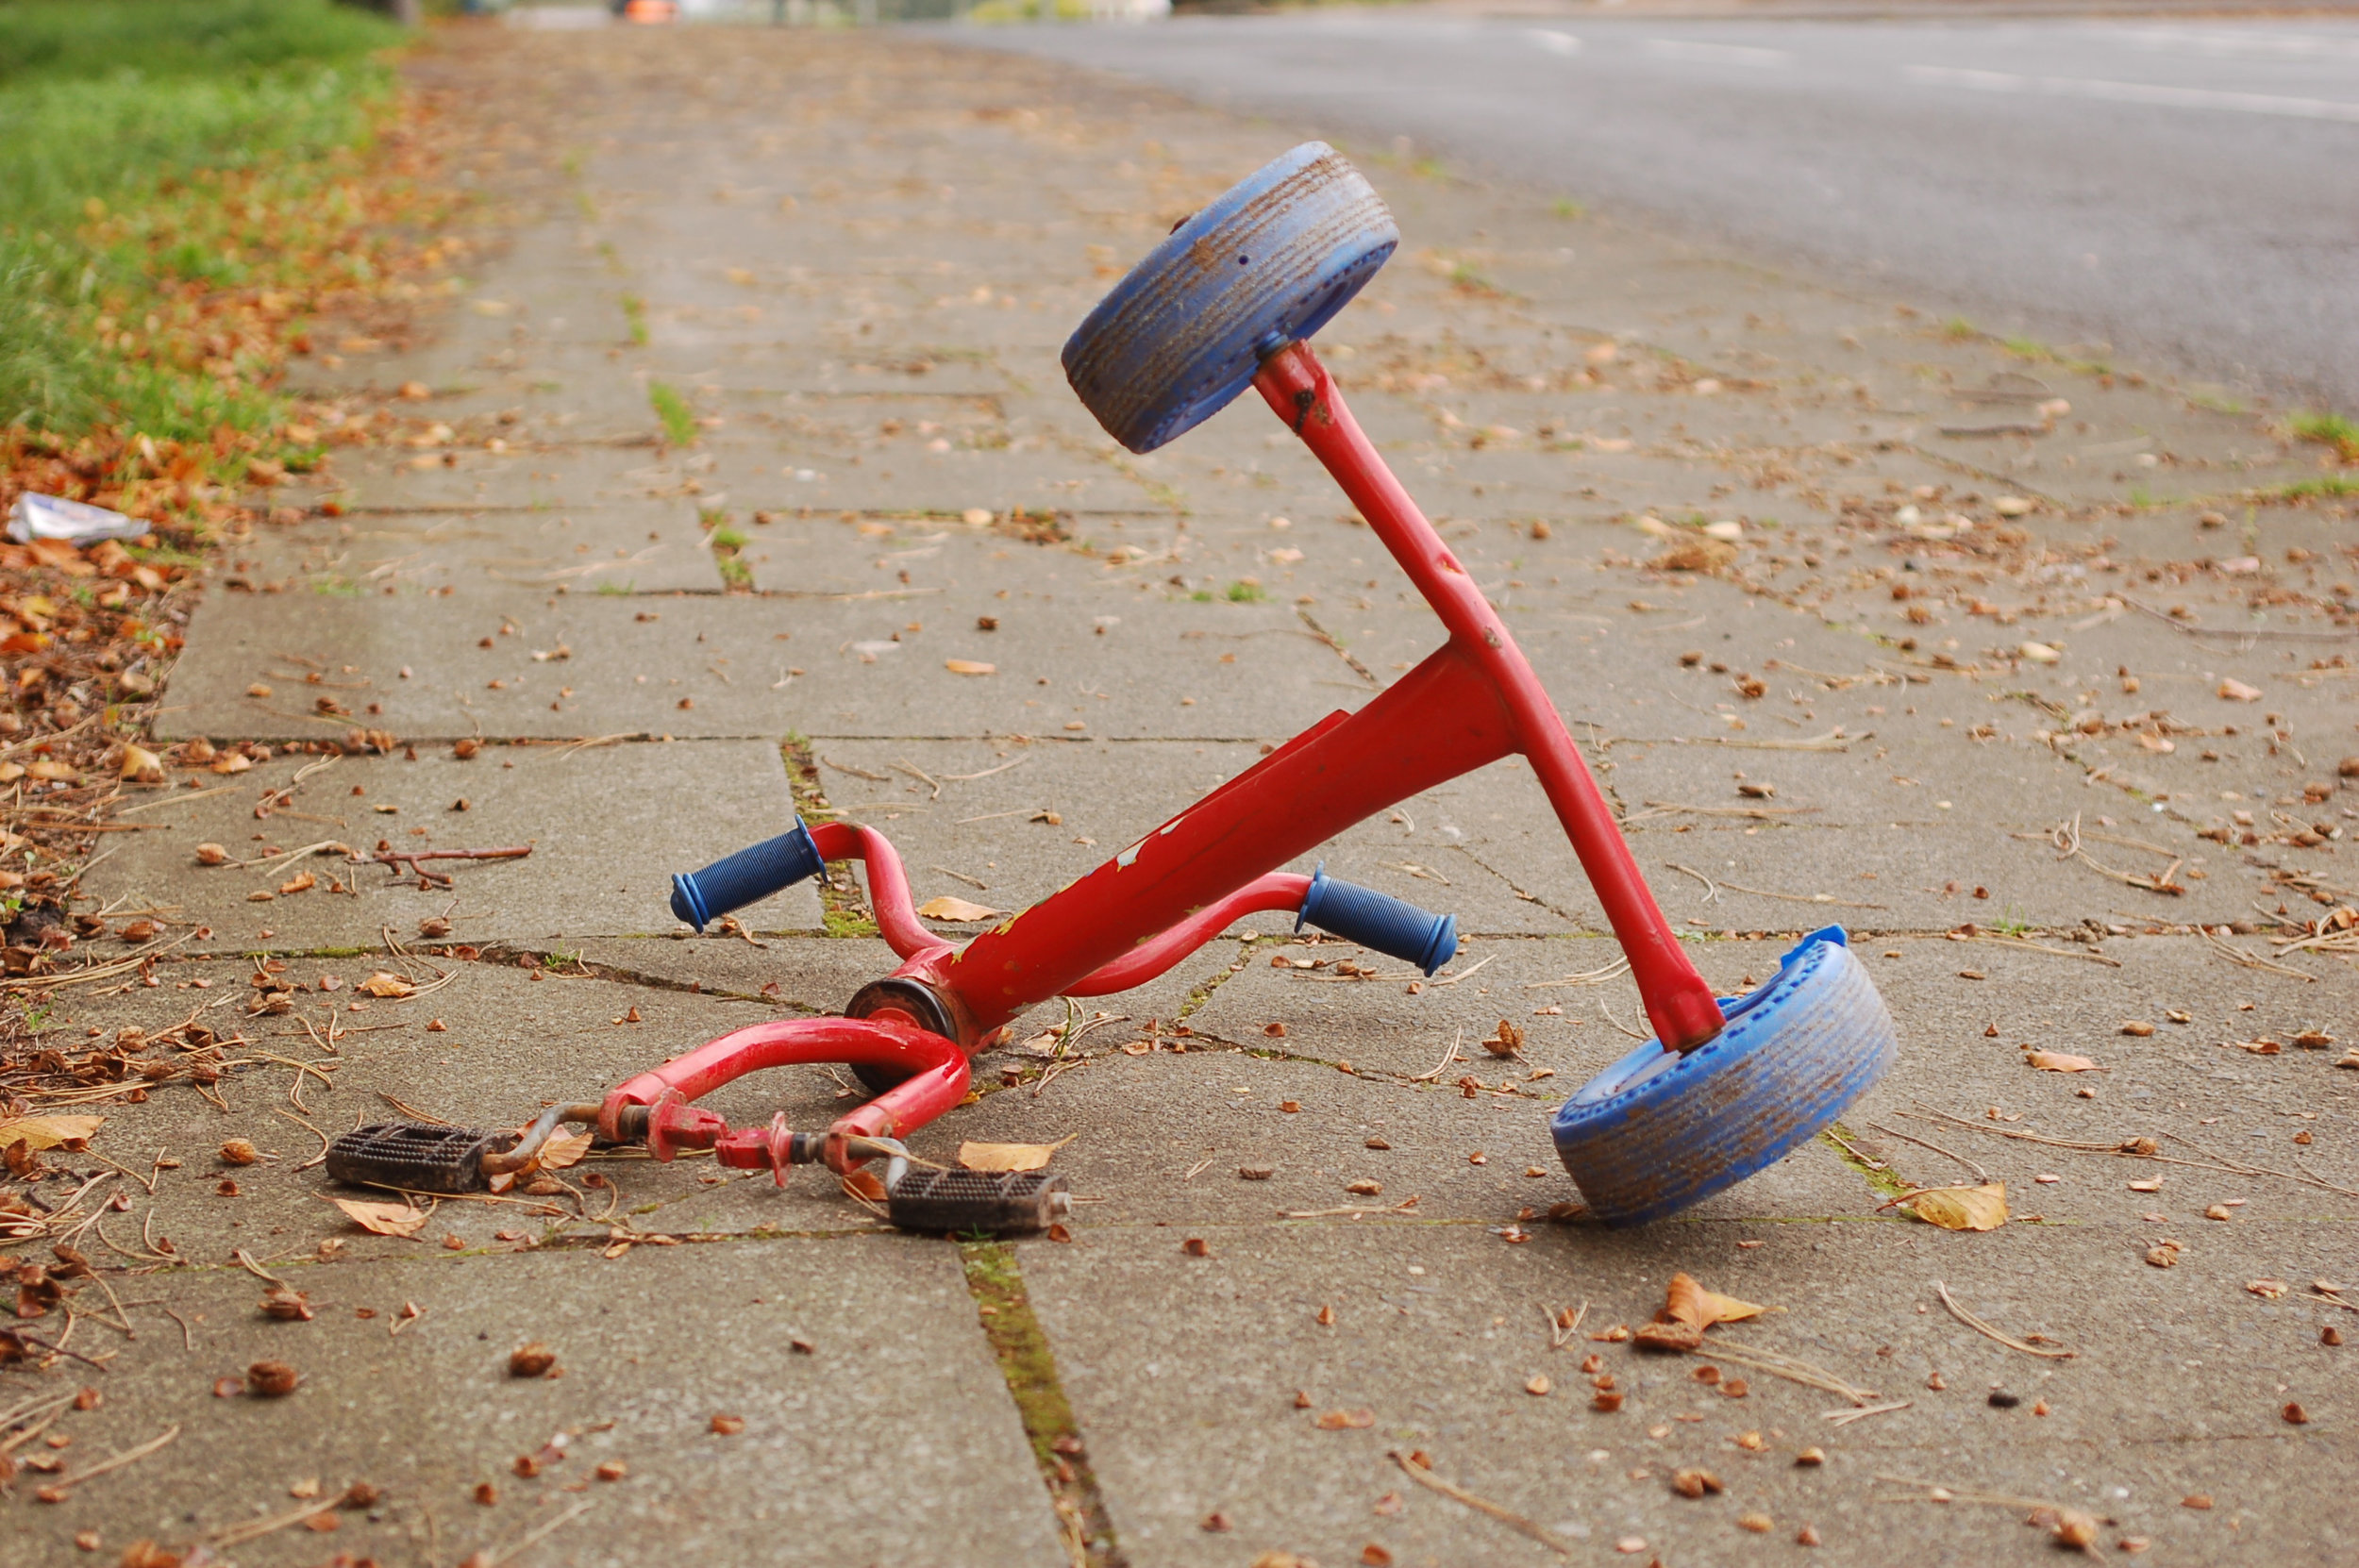 An image of a red tricycle placed on the ground. Legal aid from a product defect attorney may be necessary.